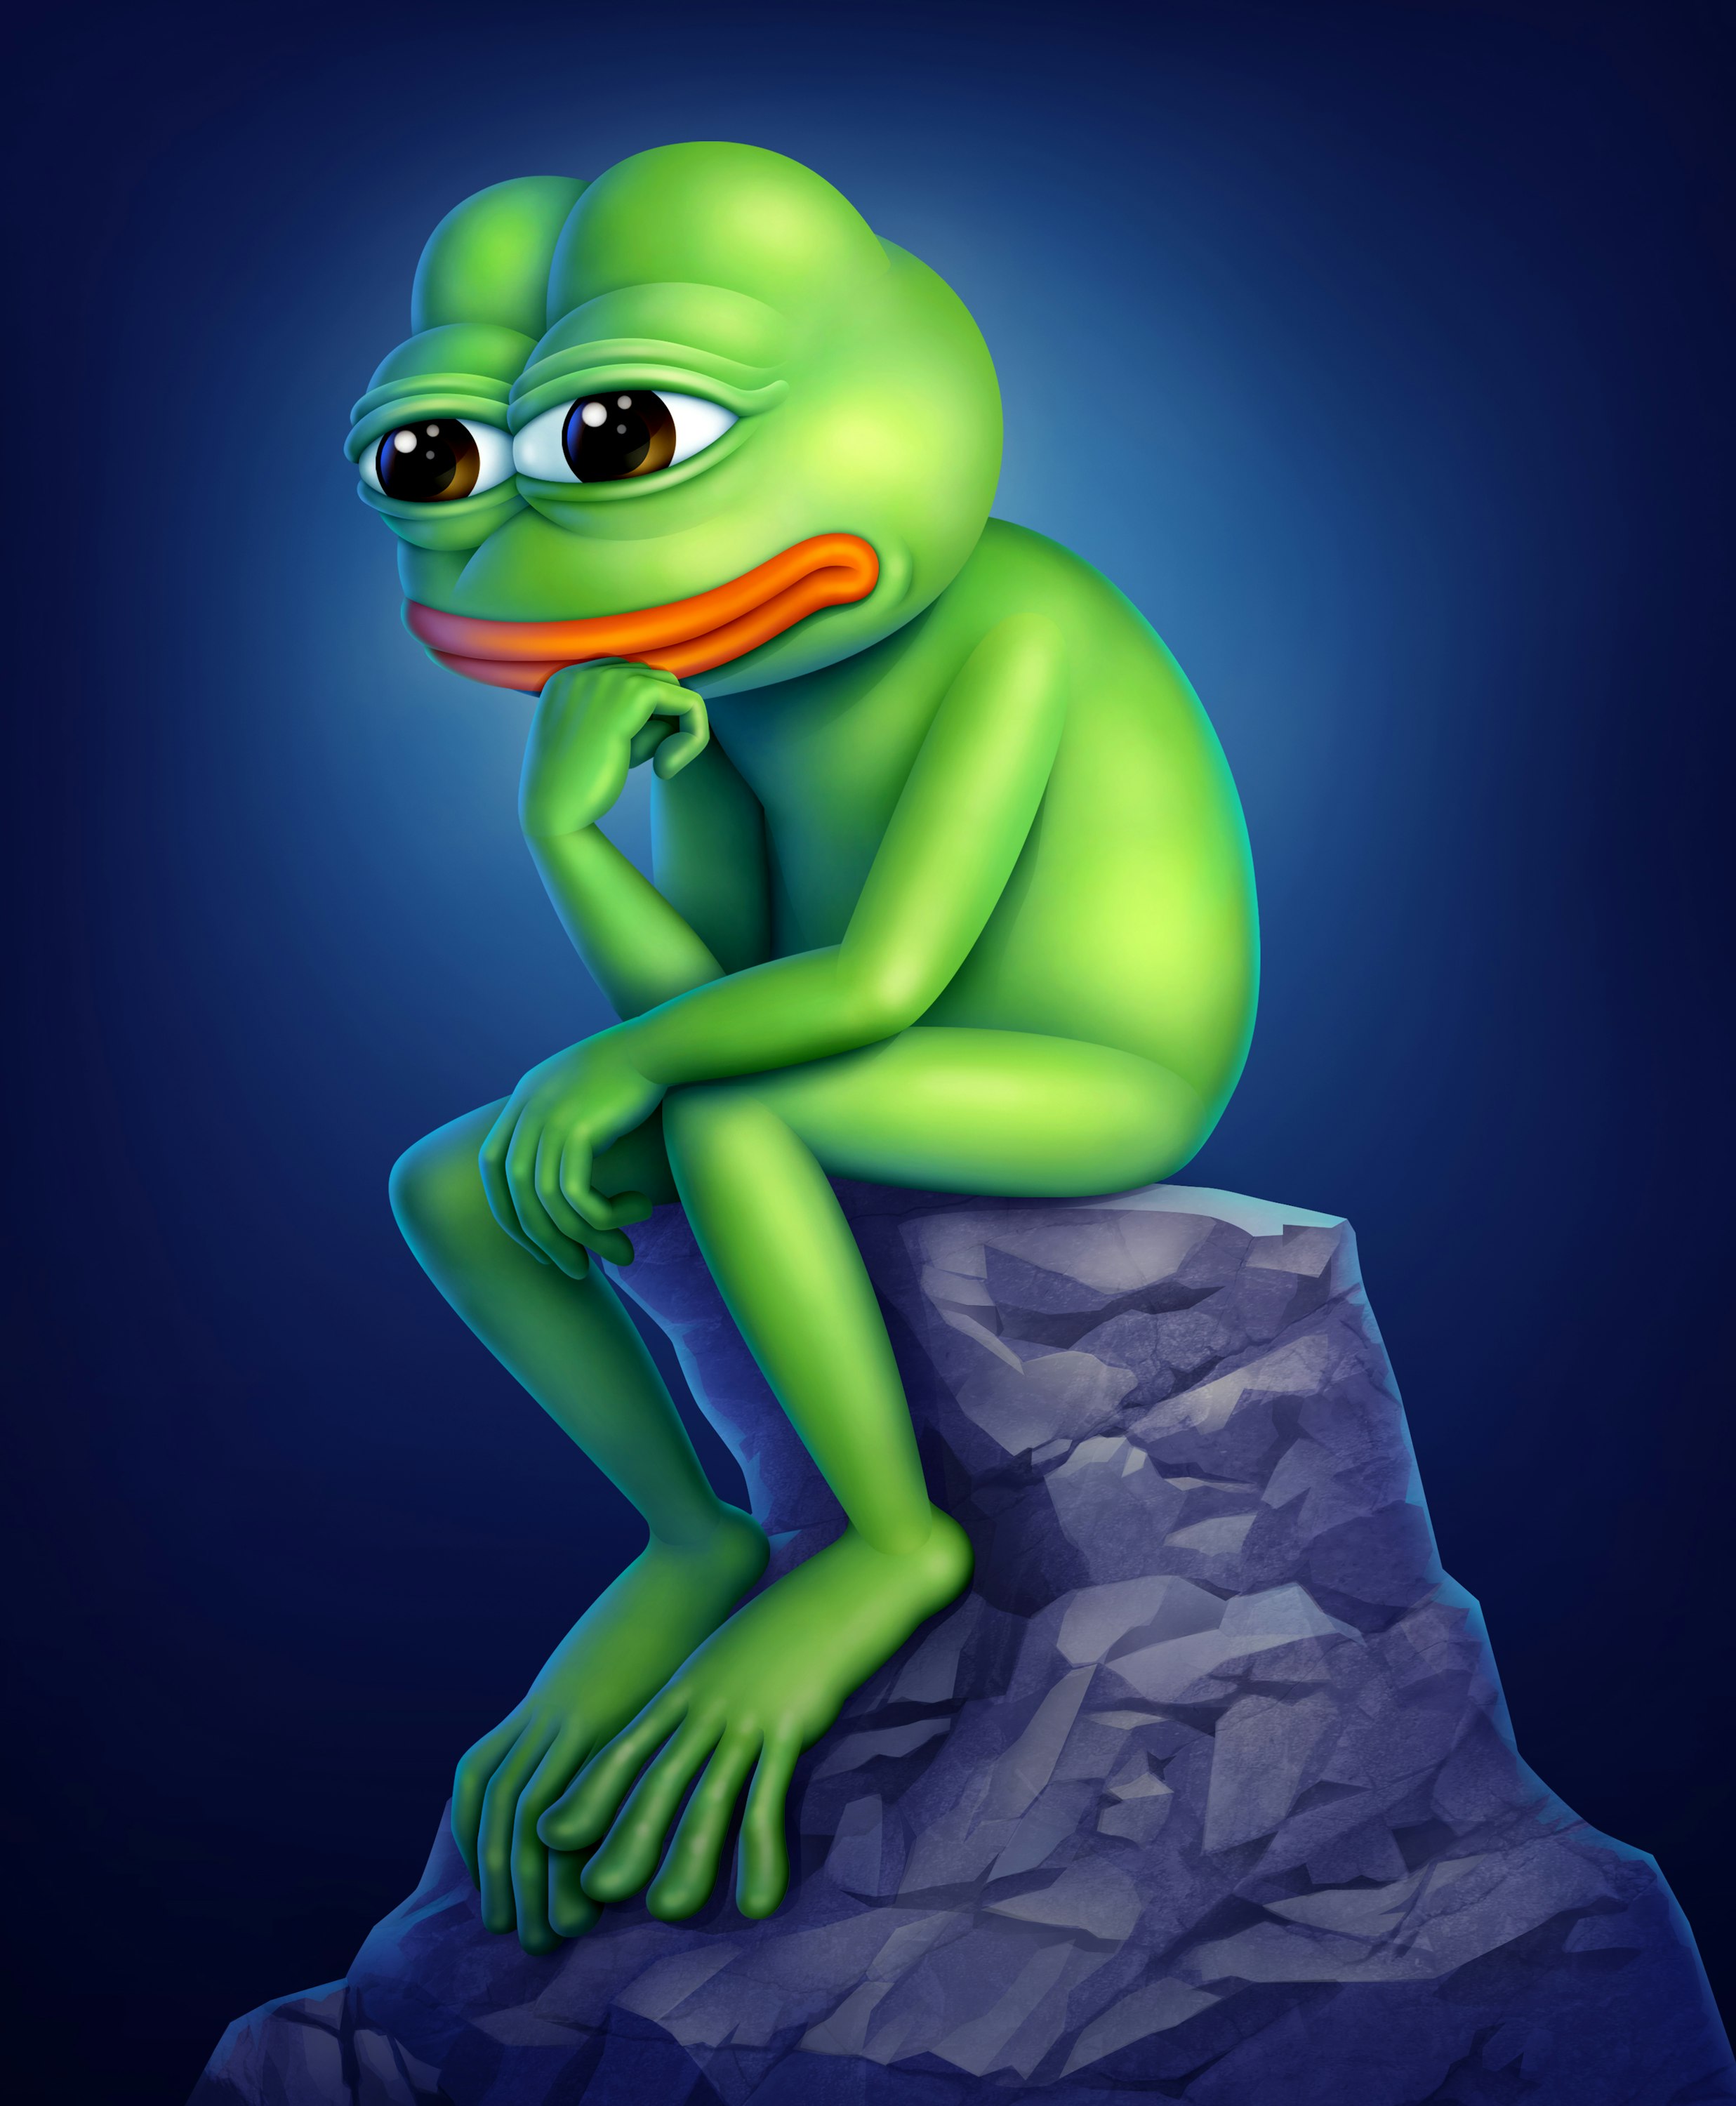 Pepe thinking, Pepe the Frog